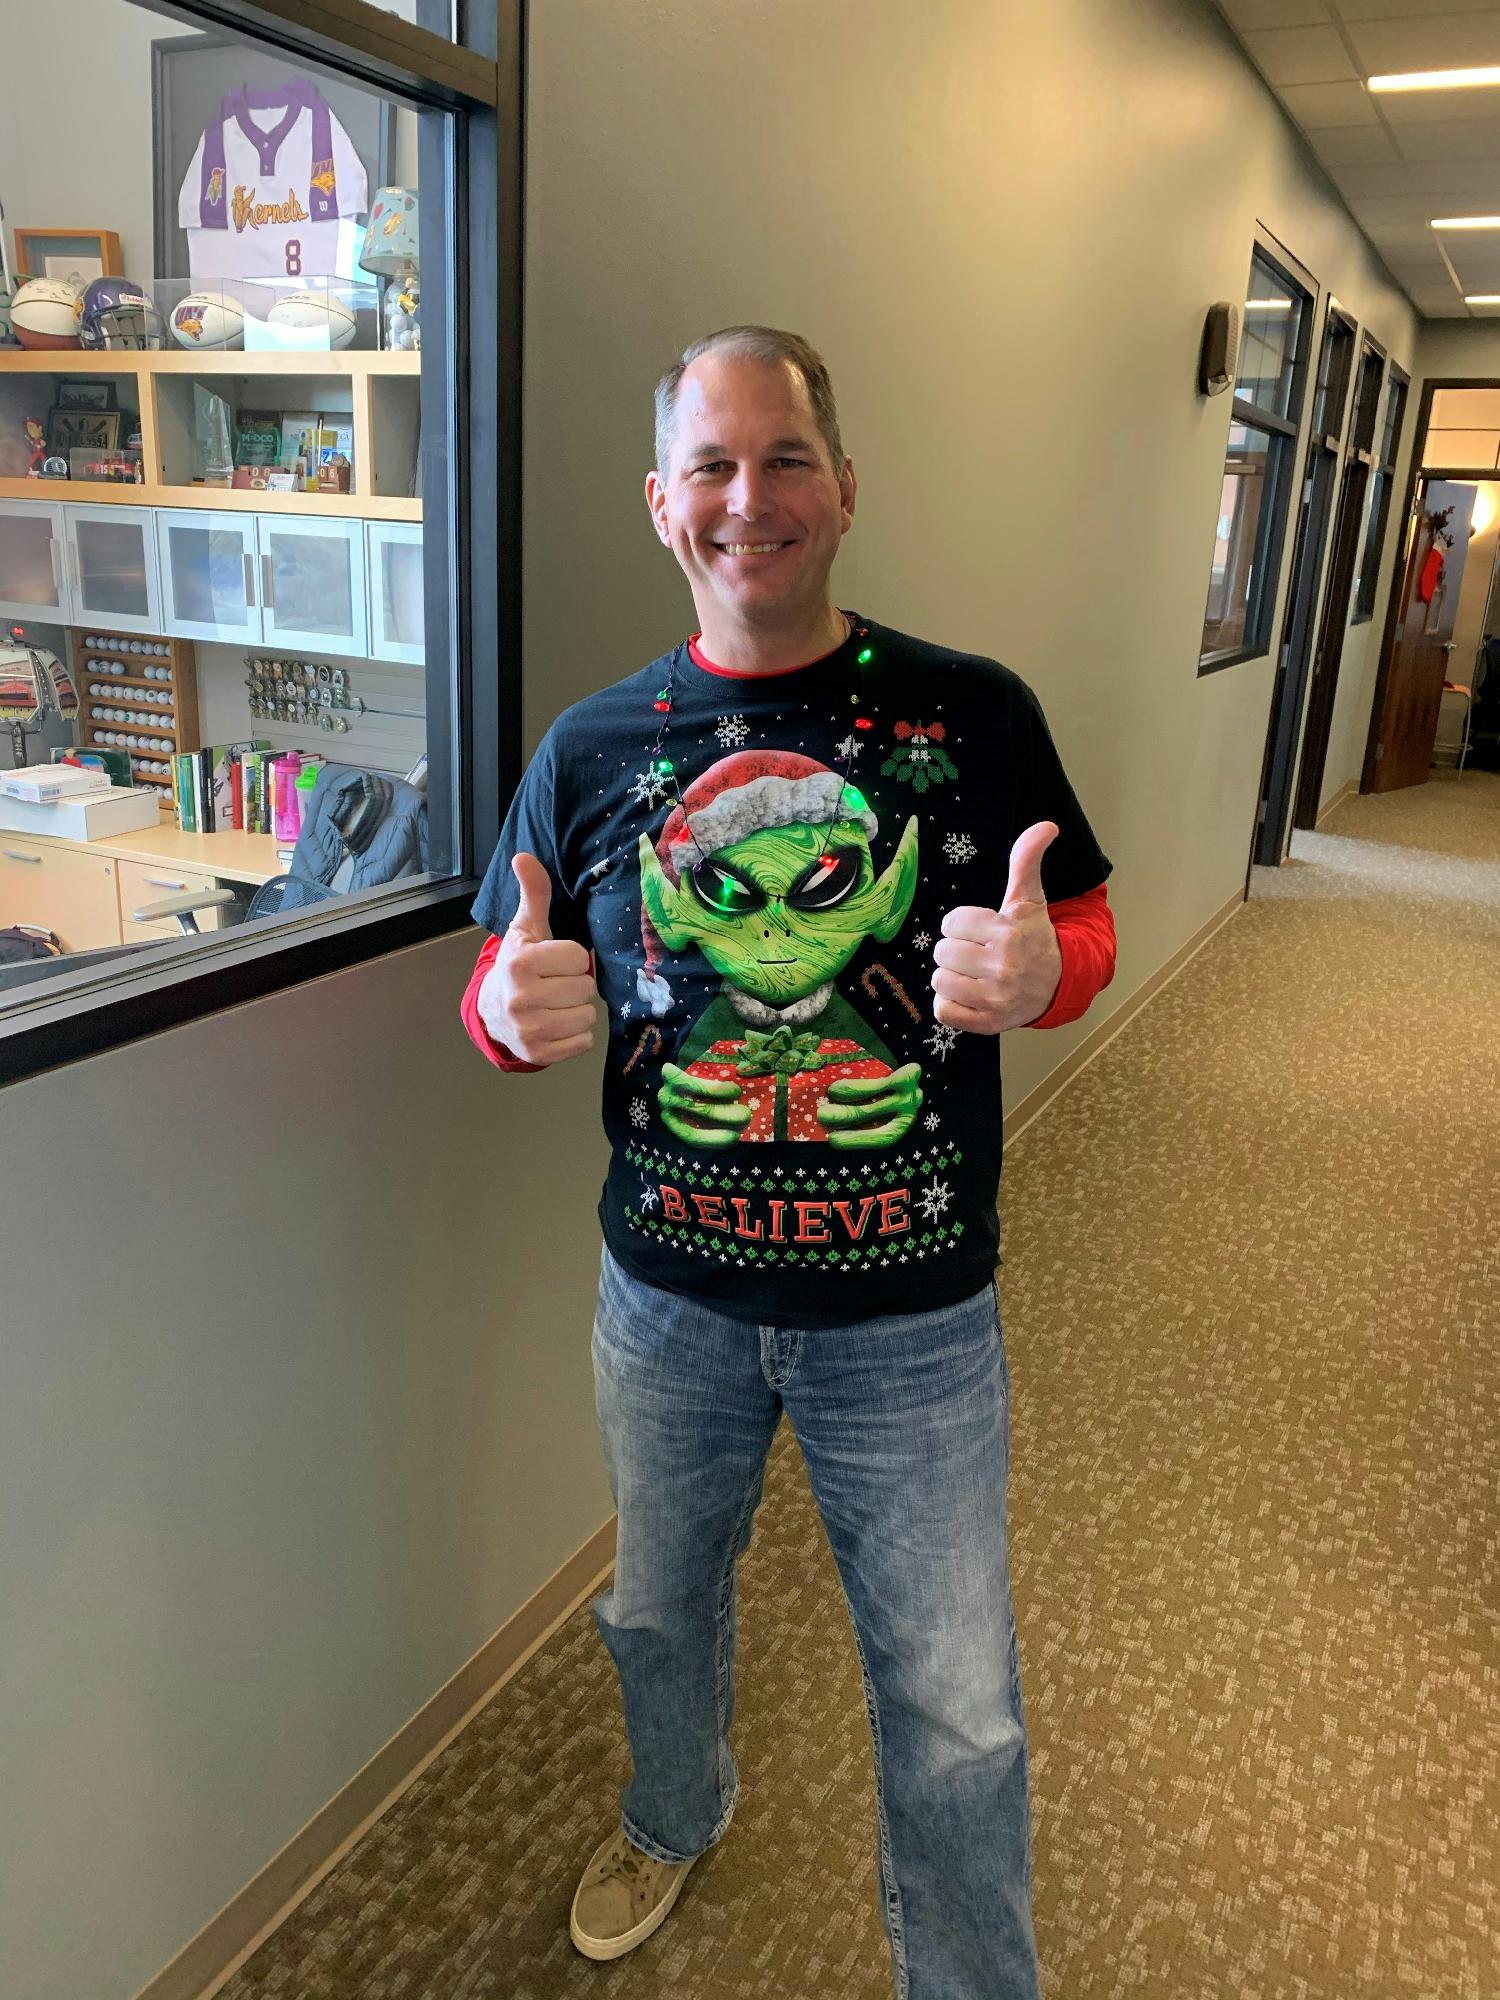 CEO, Ray Brown, sports his idea of an ugly Christmas sweater during our holiday celebration.